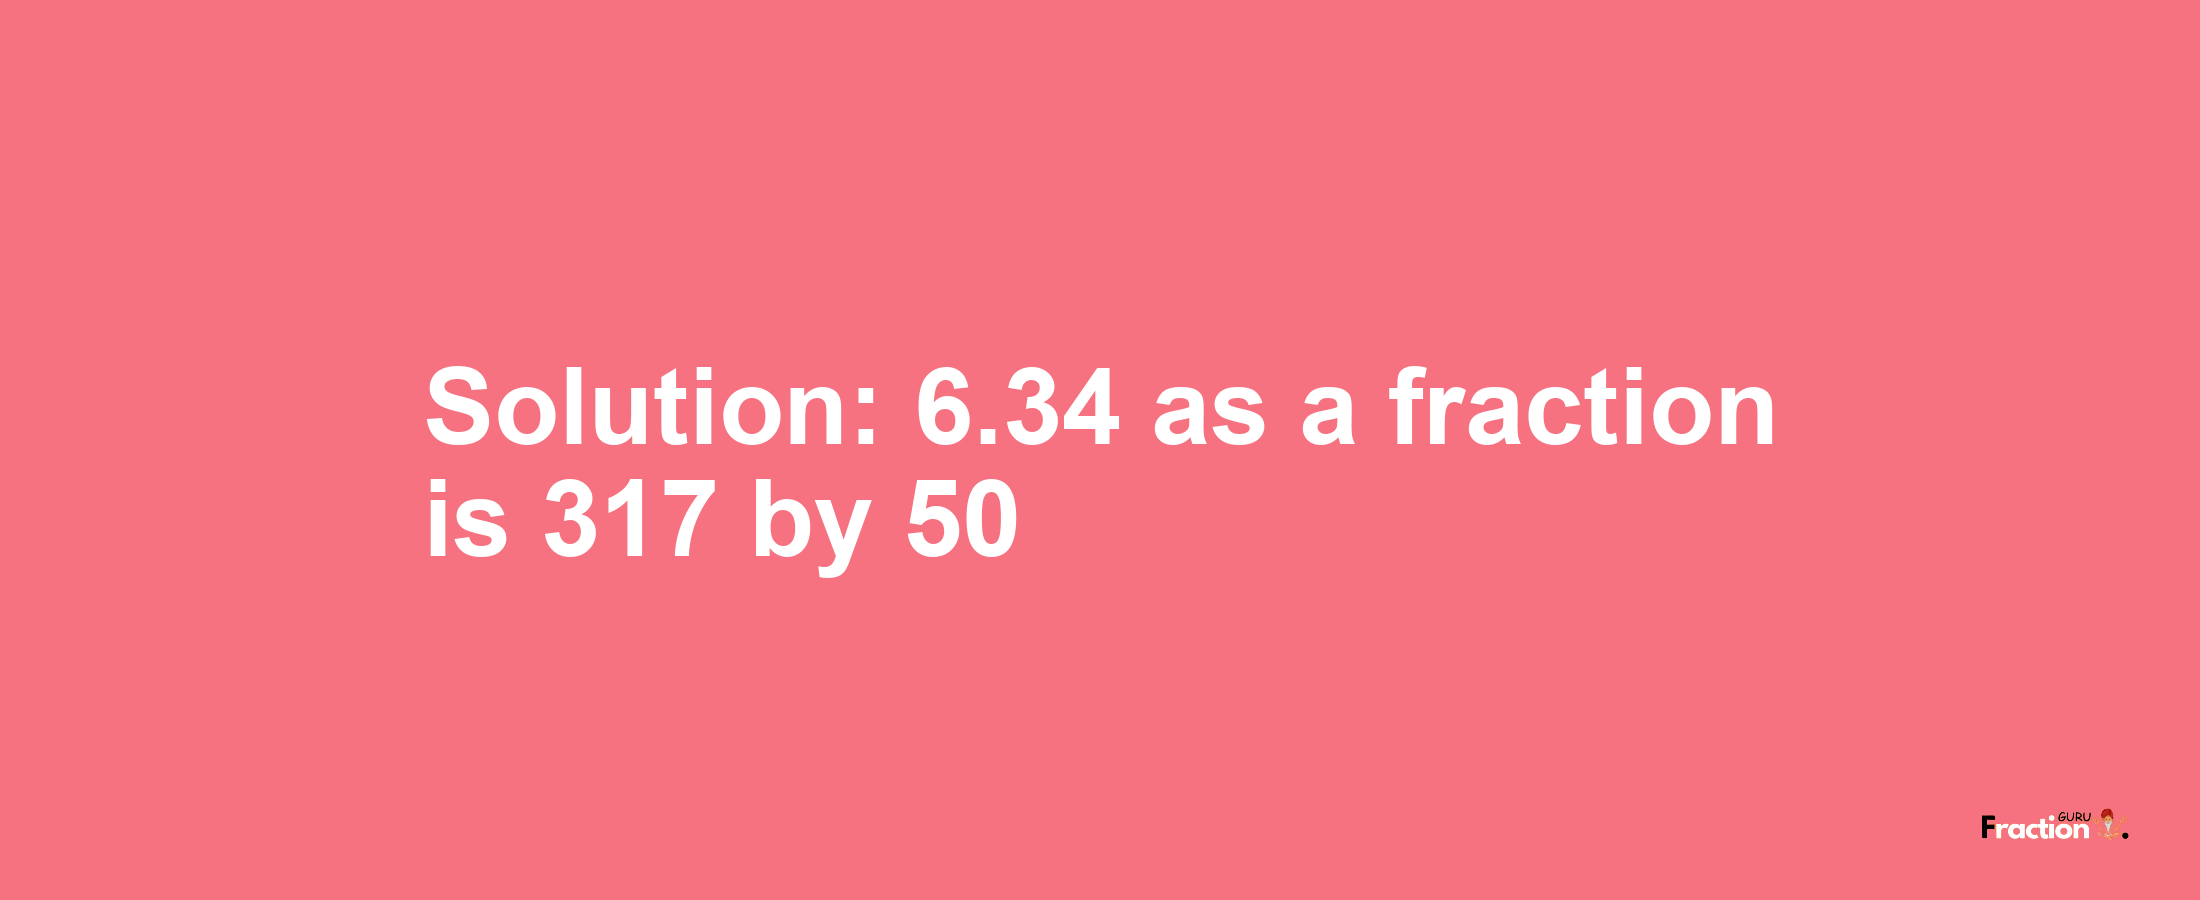 Solution:6.34 as a fraction is 317/50